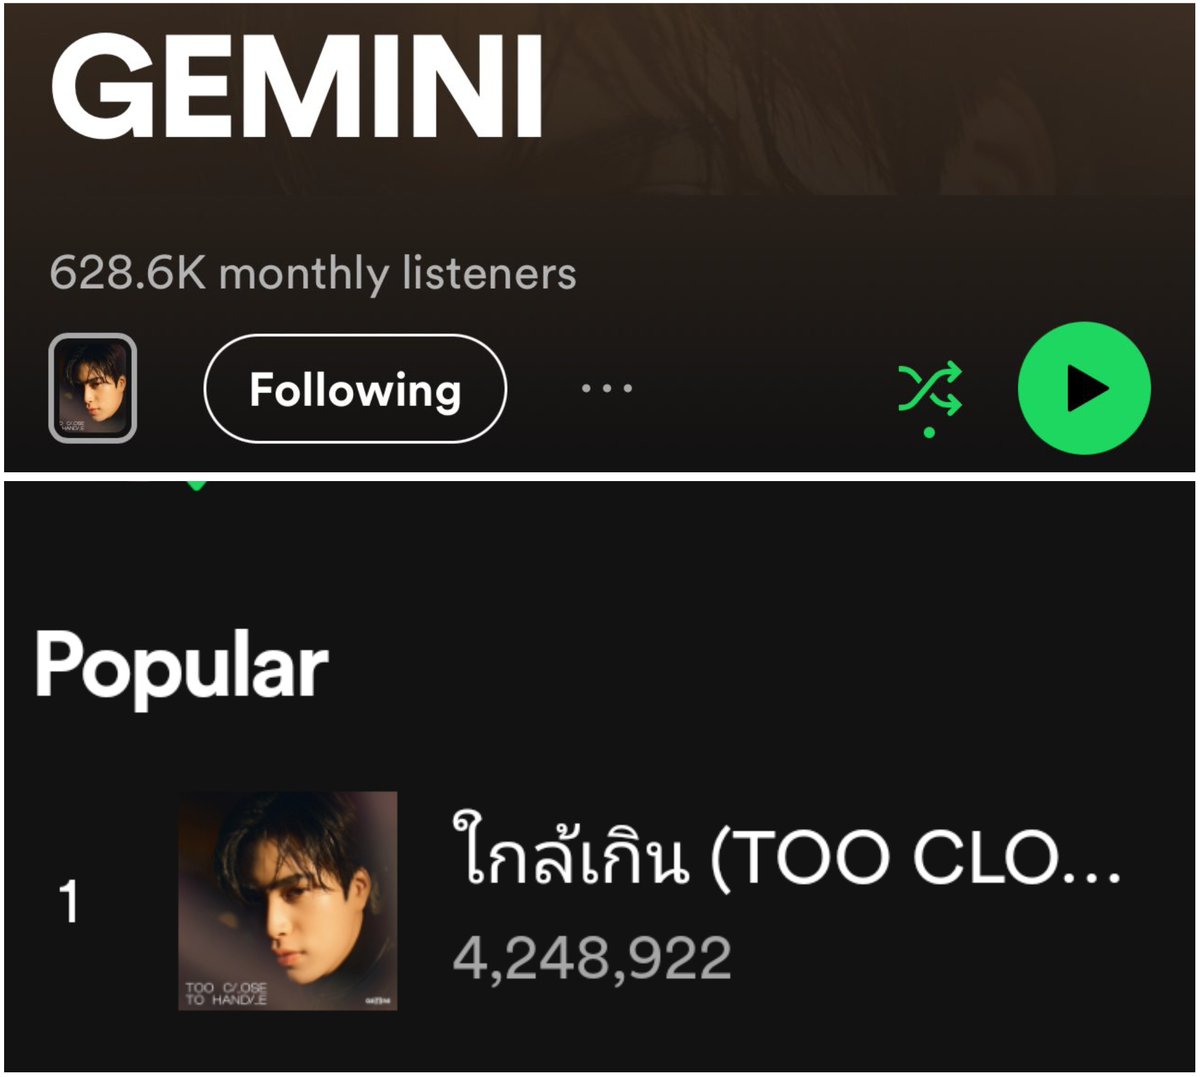 tcth is really doing good 🥹

*EFM94 Champ of the month
*Gets no.1 5 times in radio charts
*Charted high (inside top 10) in radio charts
*Reached 4 million streams faster than ayw
*Gemini being the riser artist with the most monthly listeners in spotify 
#พี่ใกล้ChampOfAprilEFM